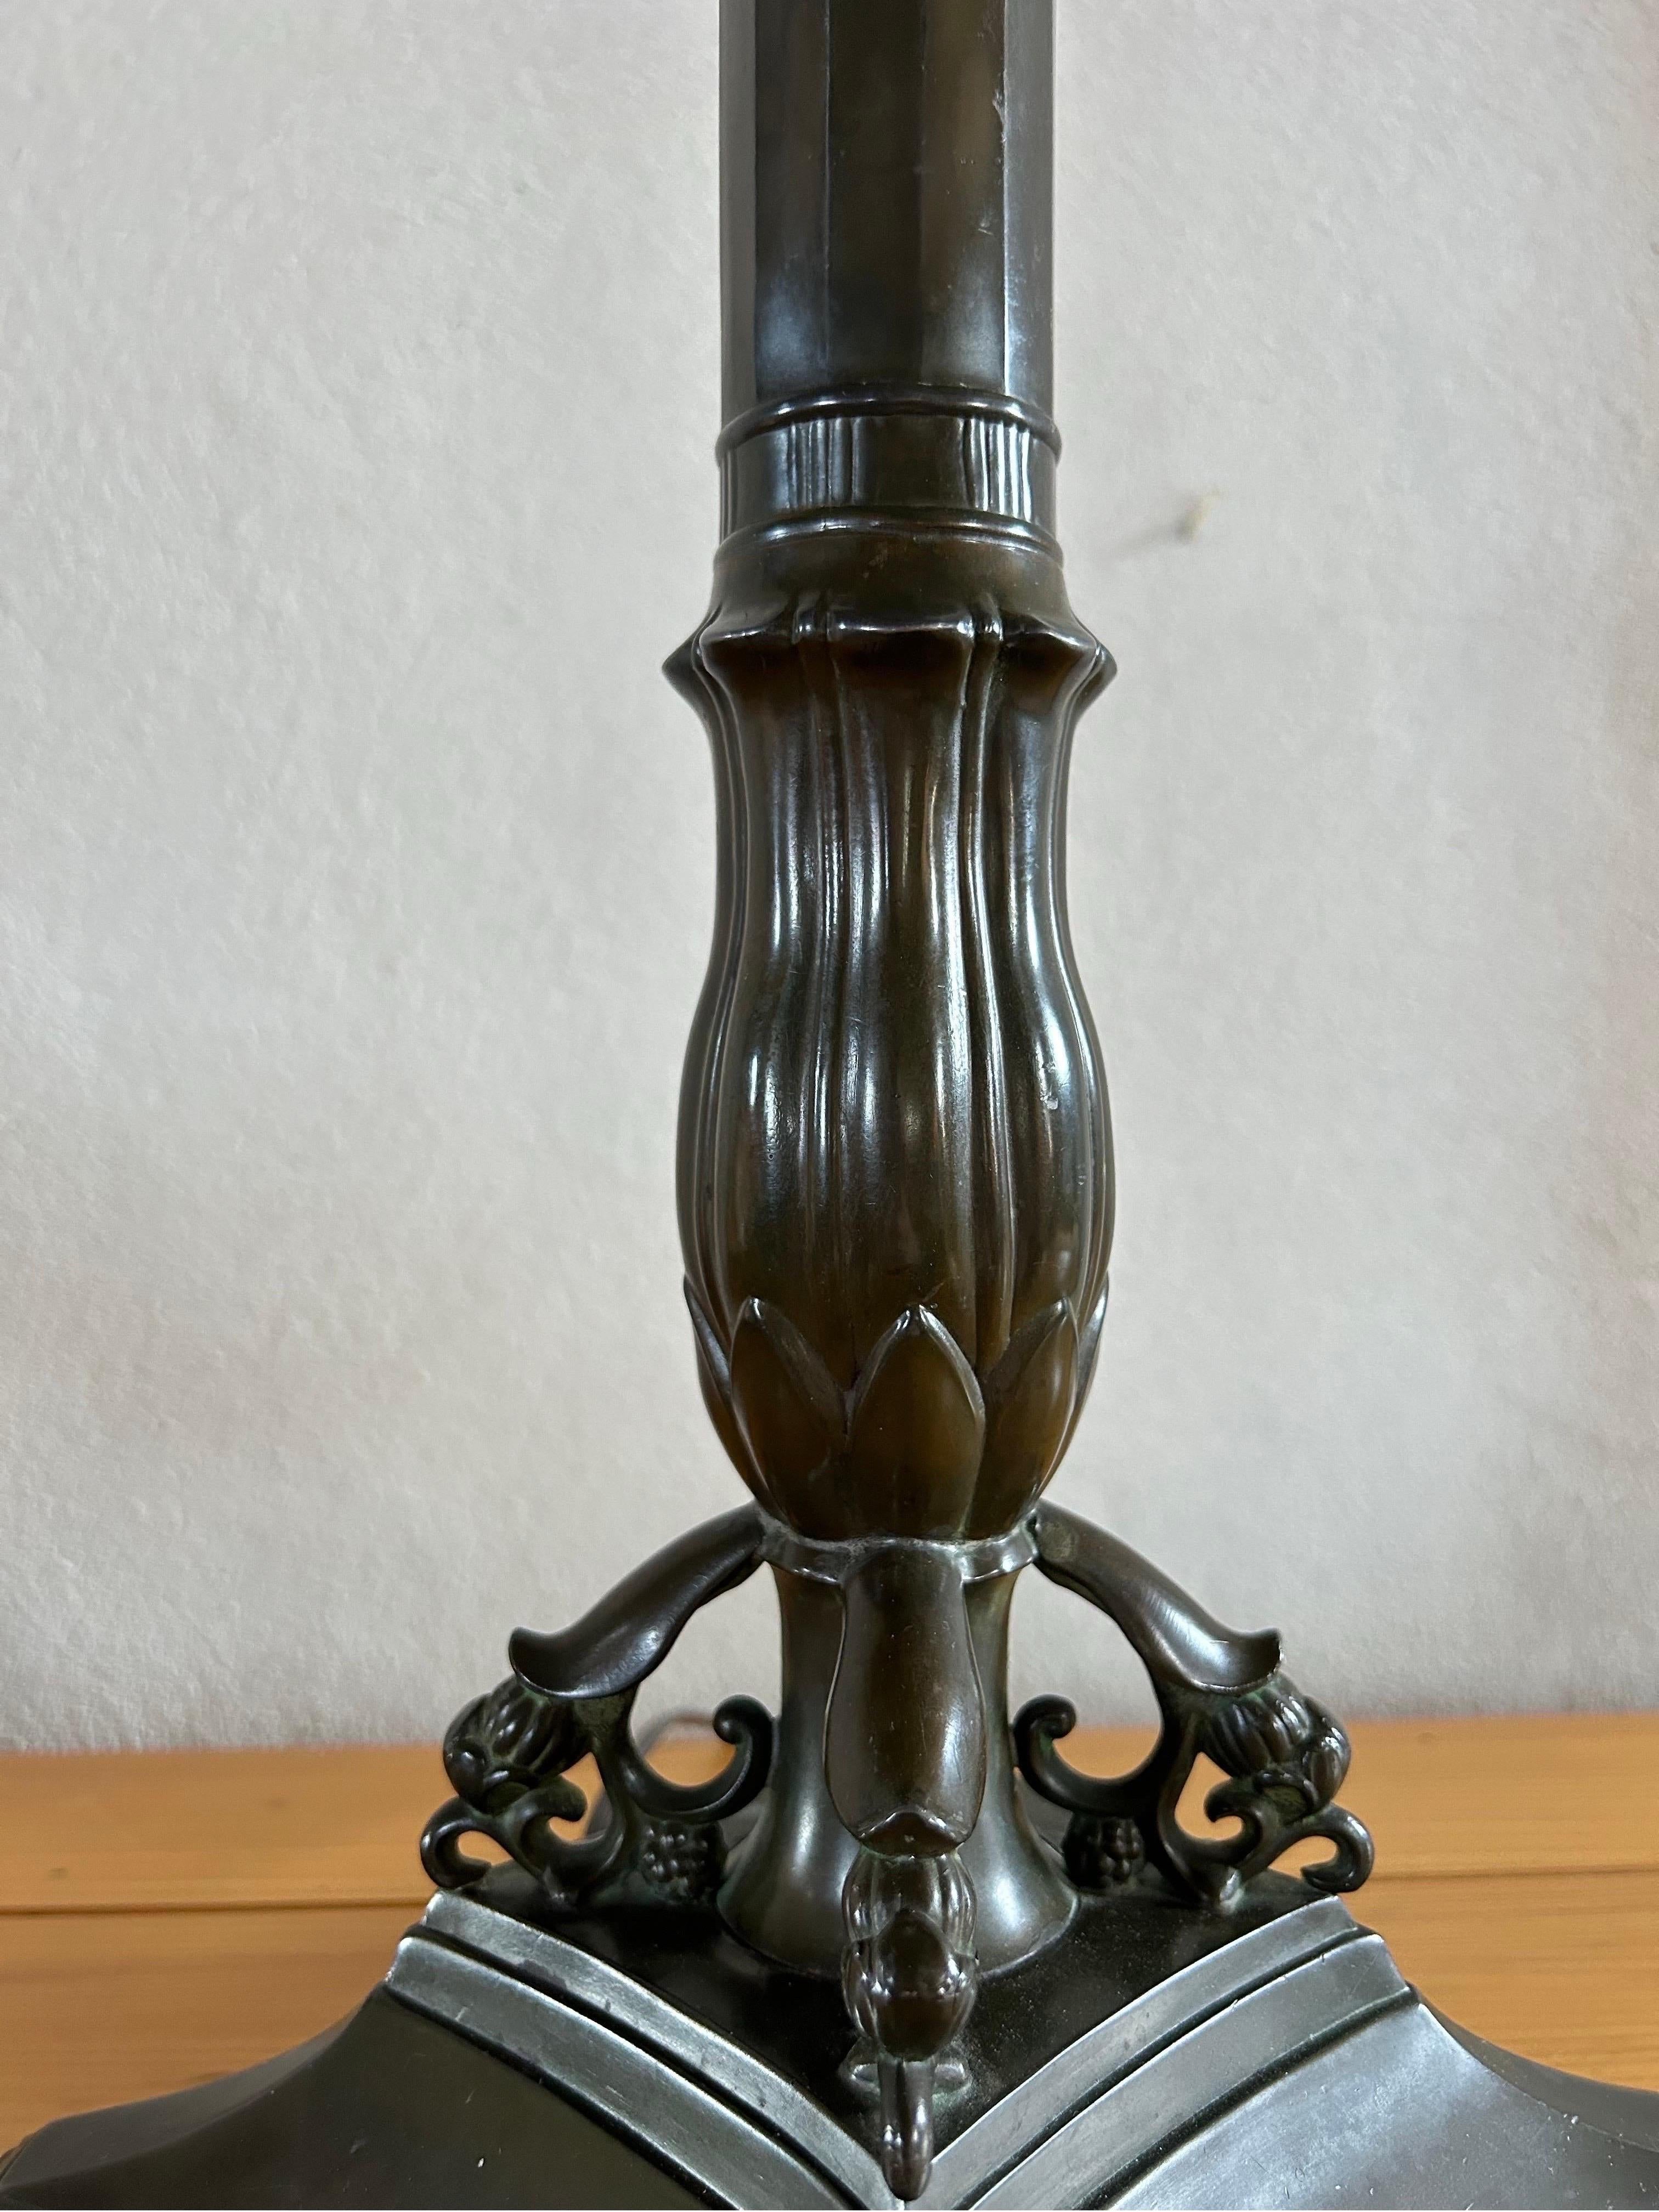 Rare and tall Just Andersen Disko metal table lamp, Model D8. Standing at an impressive height of 72 cm (without the shade), this lamp is a testament to the elegance and sophistication of Danish design in the 1920s.

Crafted in Denmark by the